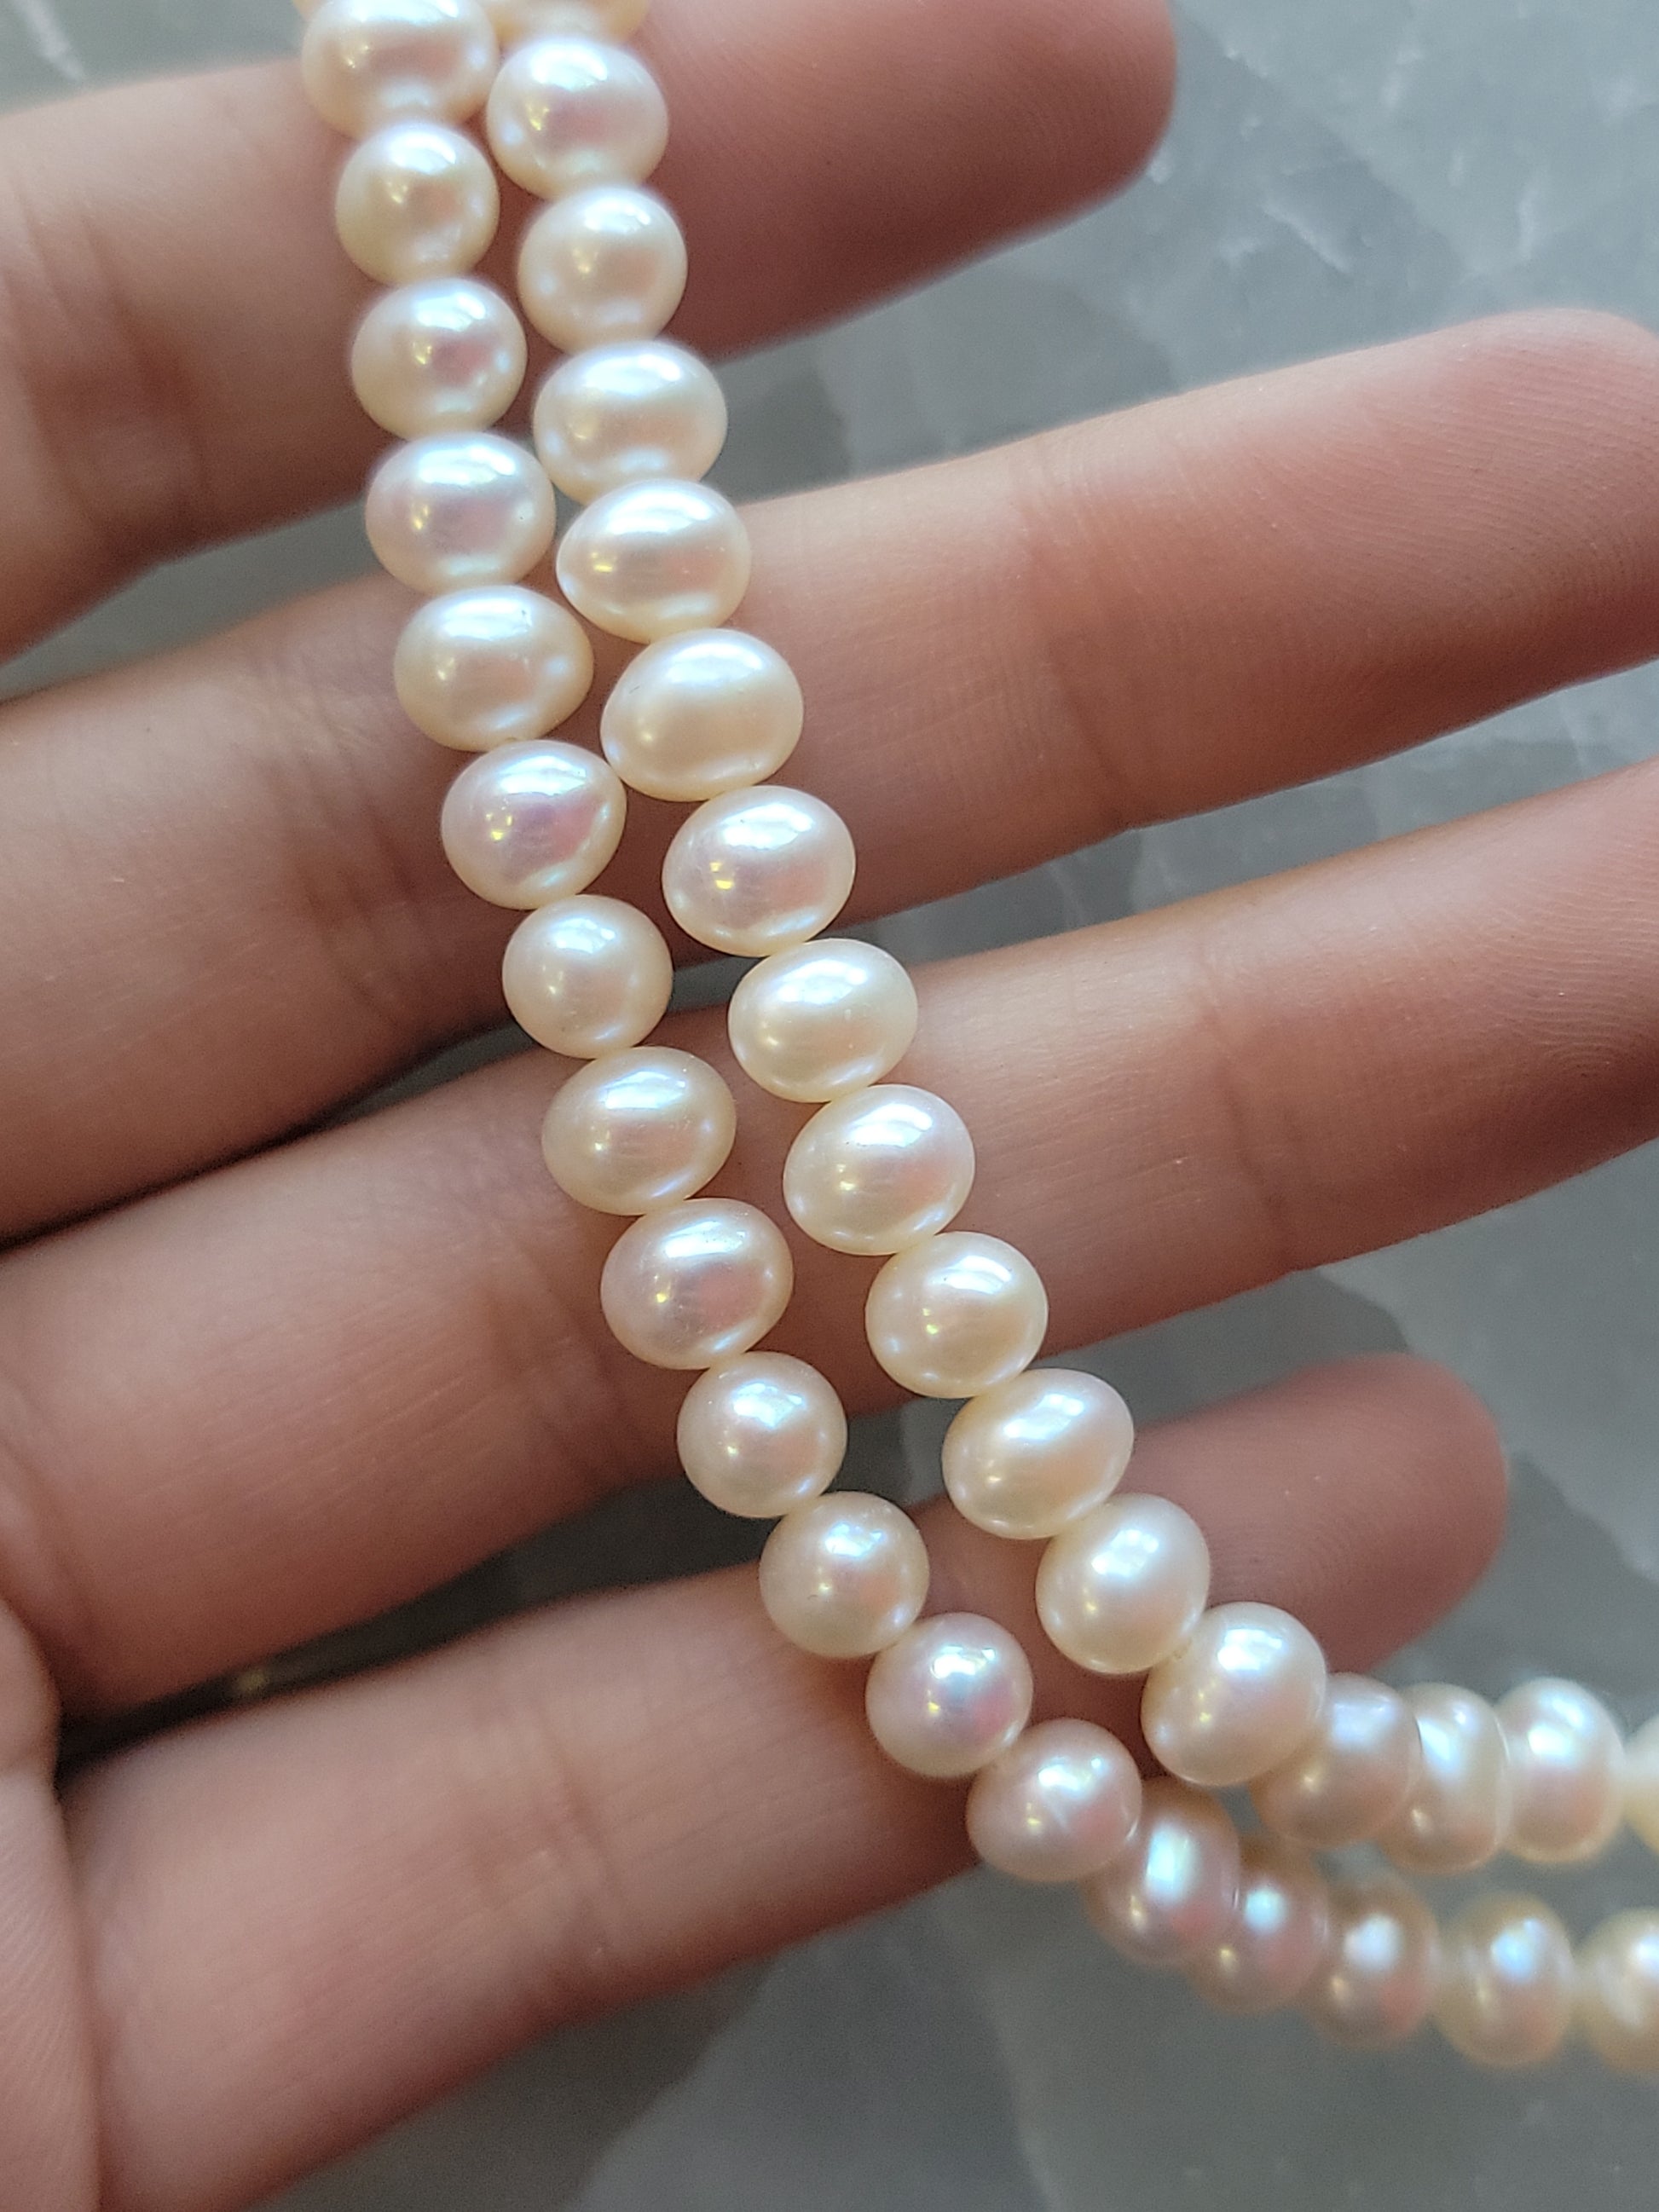 Crafting supplies such as pearl beads available at wholesale and retail prices, only at our crystal shop in San Diego!